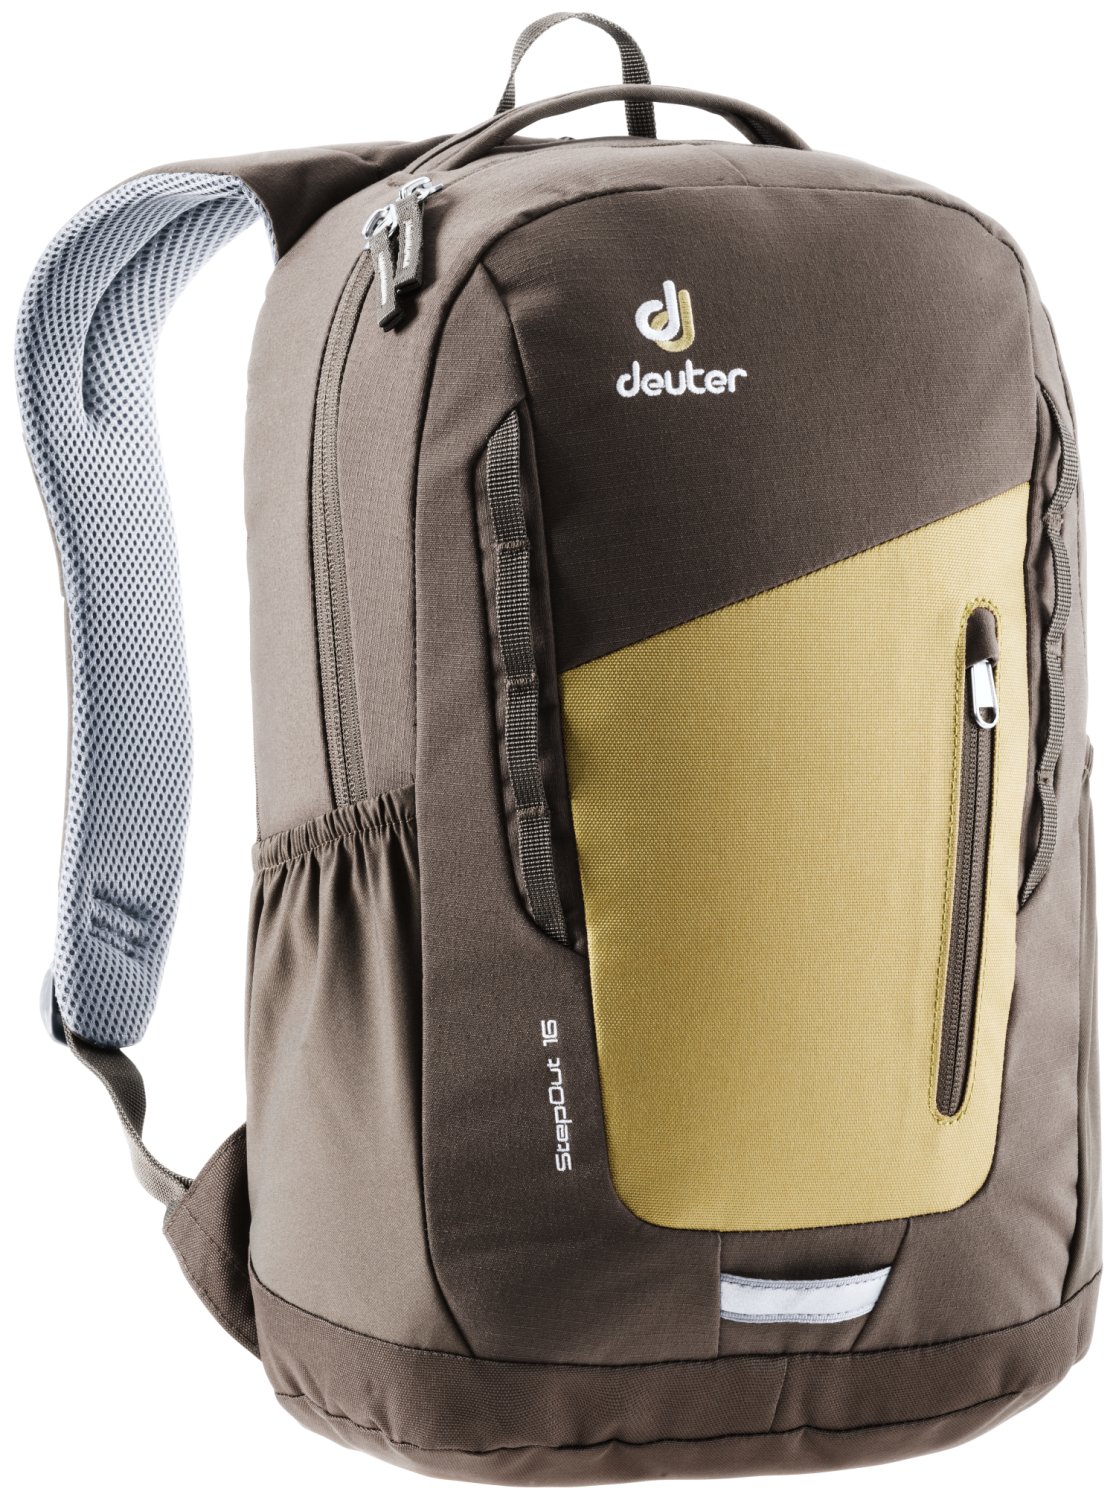 Велорюкзак Deuter StepOut 16, clay-coffee, 2020-21, 3810321_6605 велорюкзак deuter stepout 22 л clay coffee 2021 3813121 6605